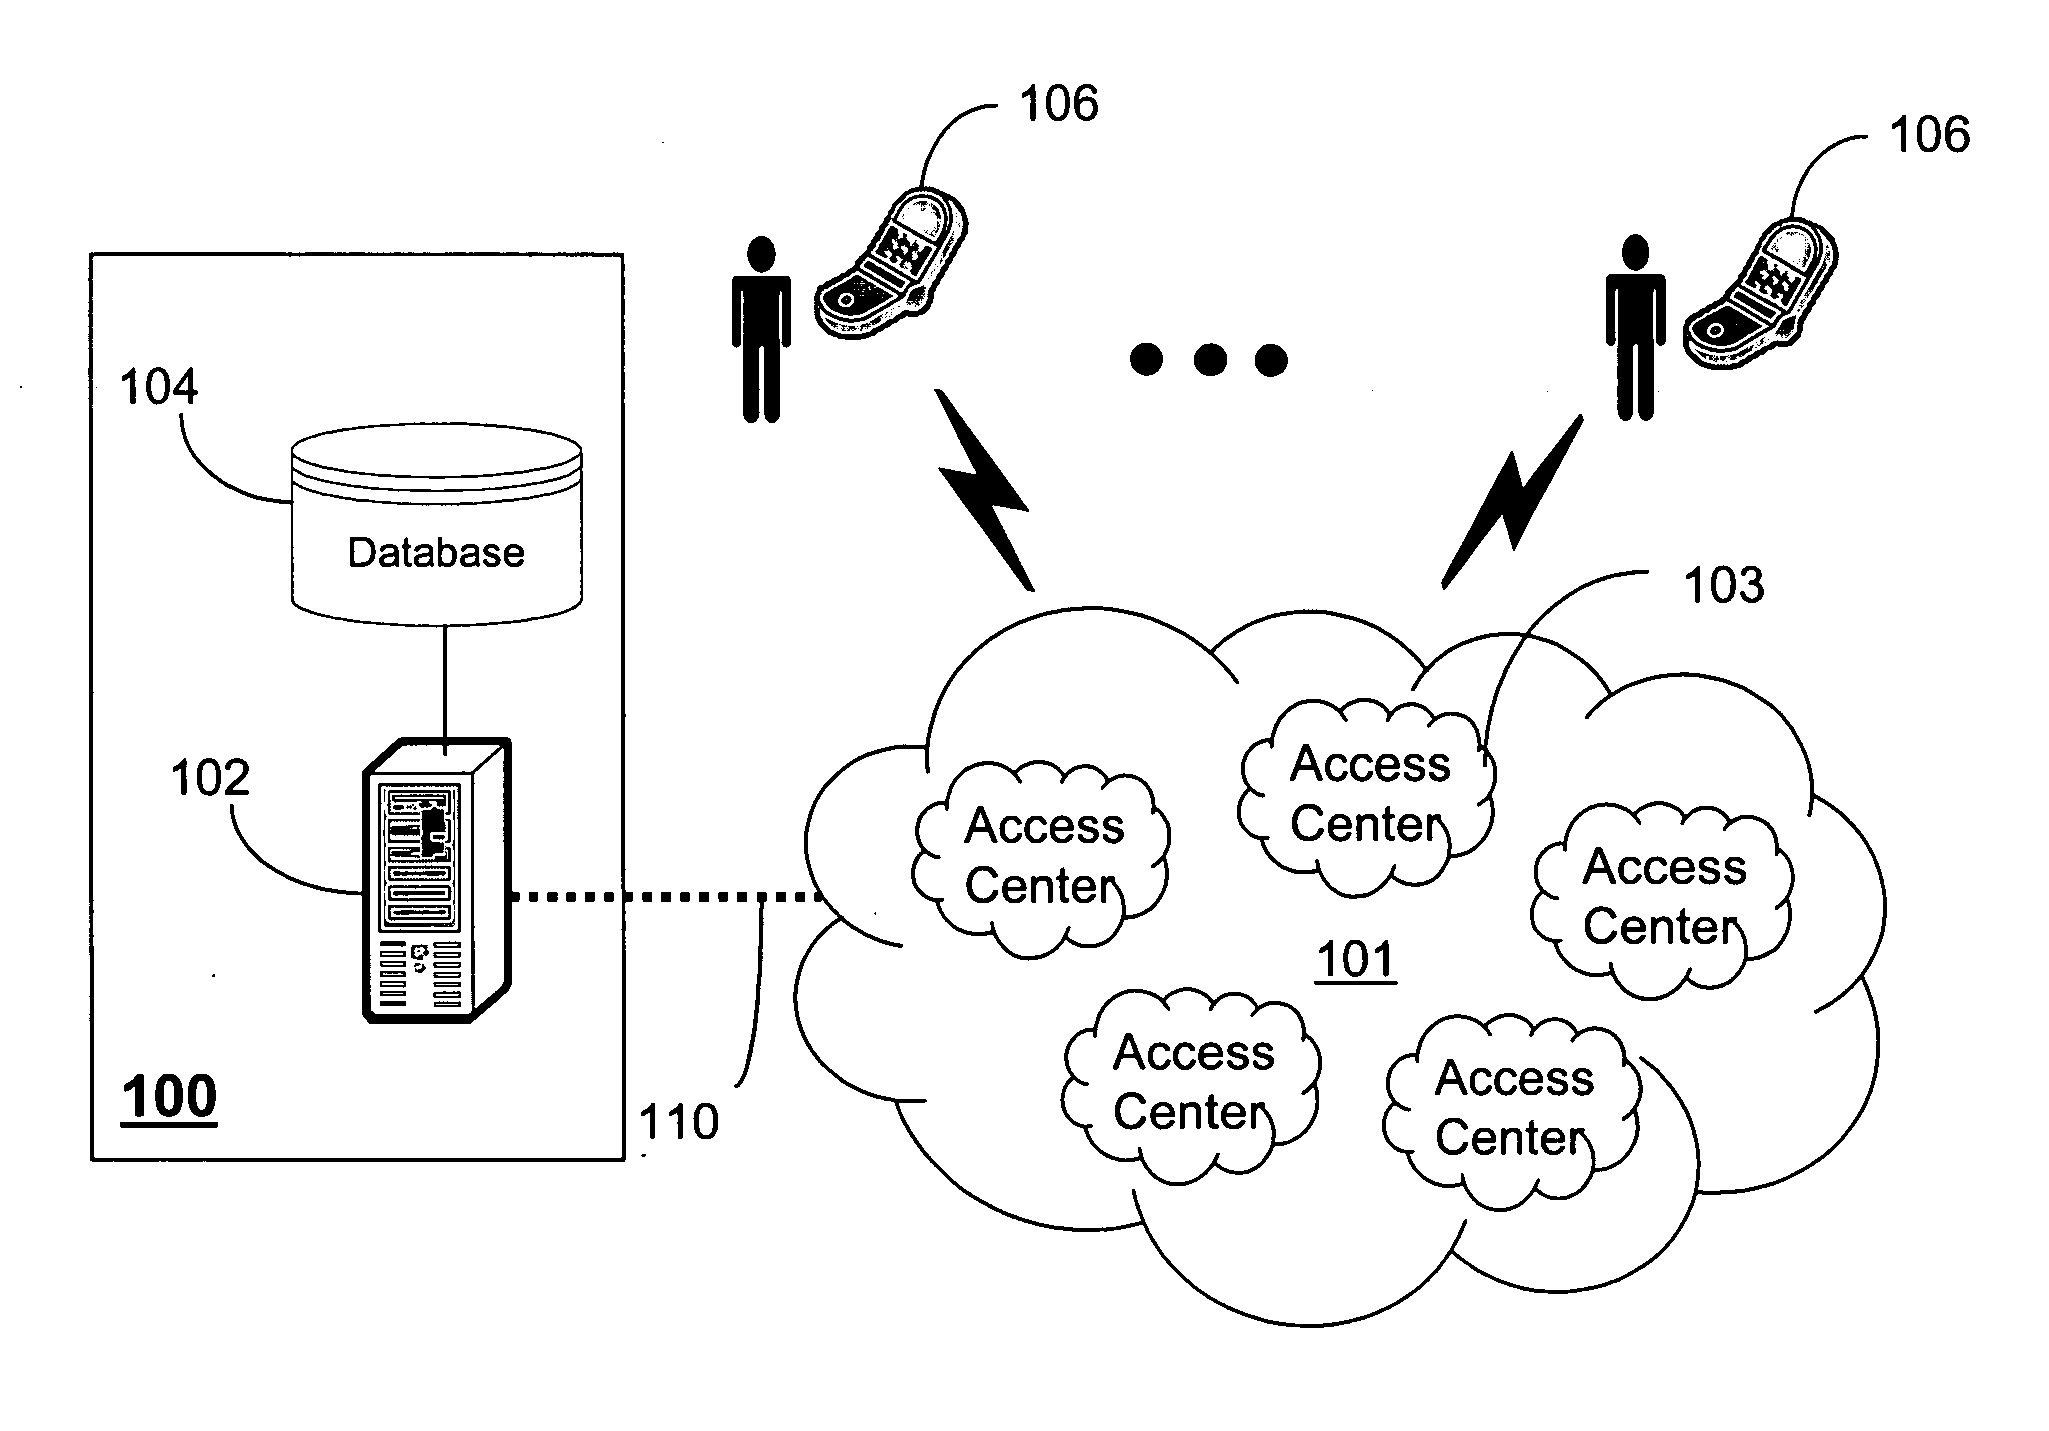 Method for enabling communications between a communication device and a wireless access point